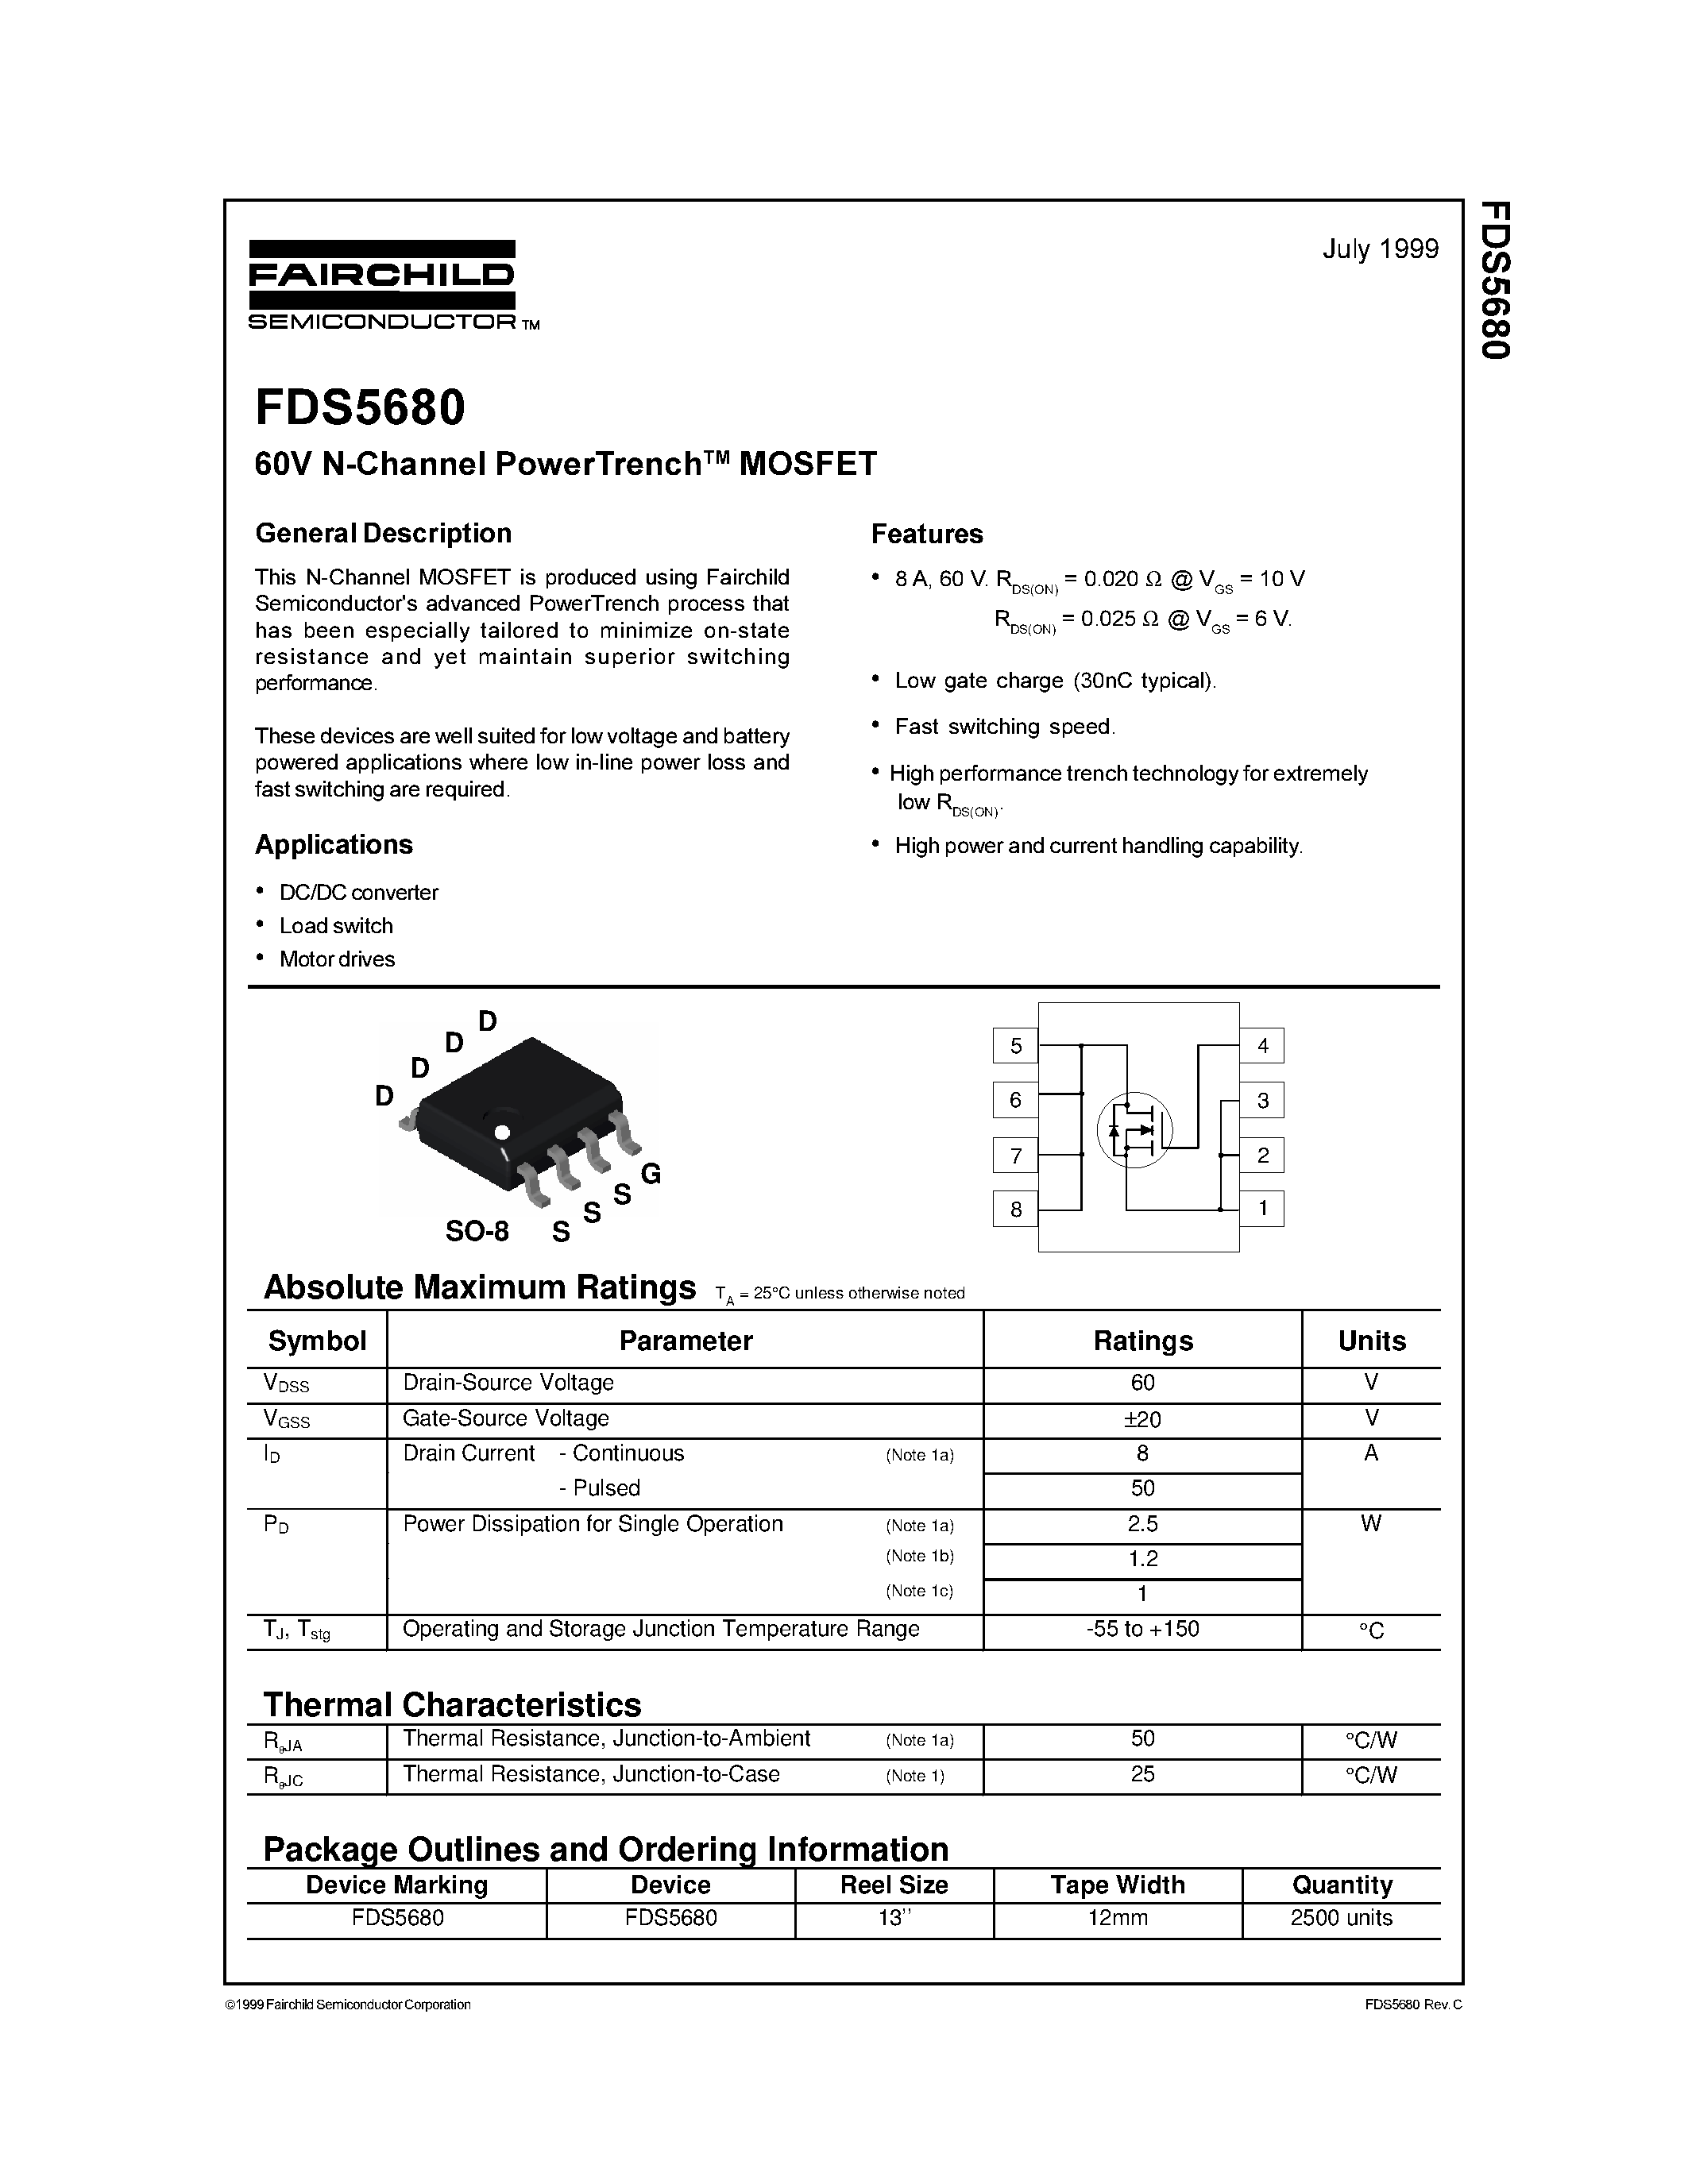 Datasheet FDS5680 - 60V N-Channel PowerTrench MOSFET page 1